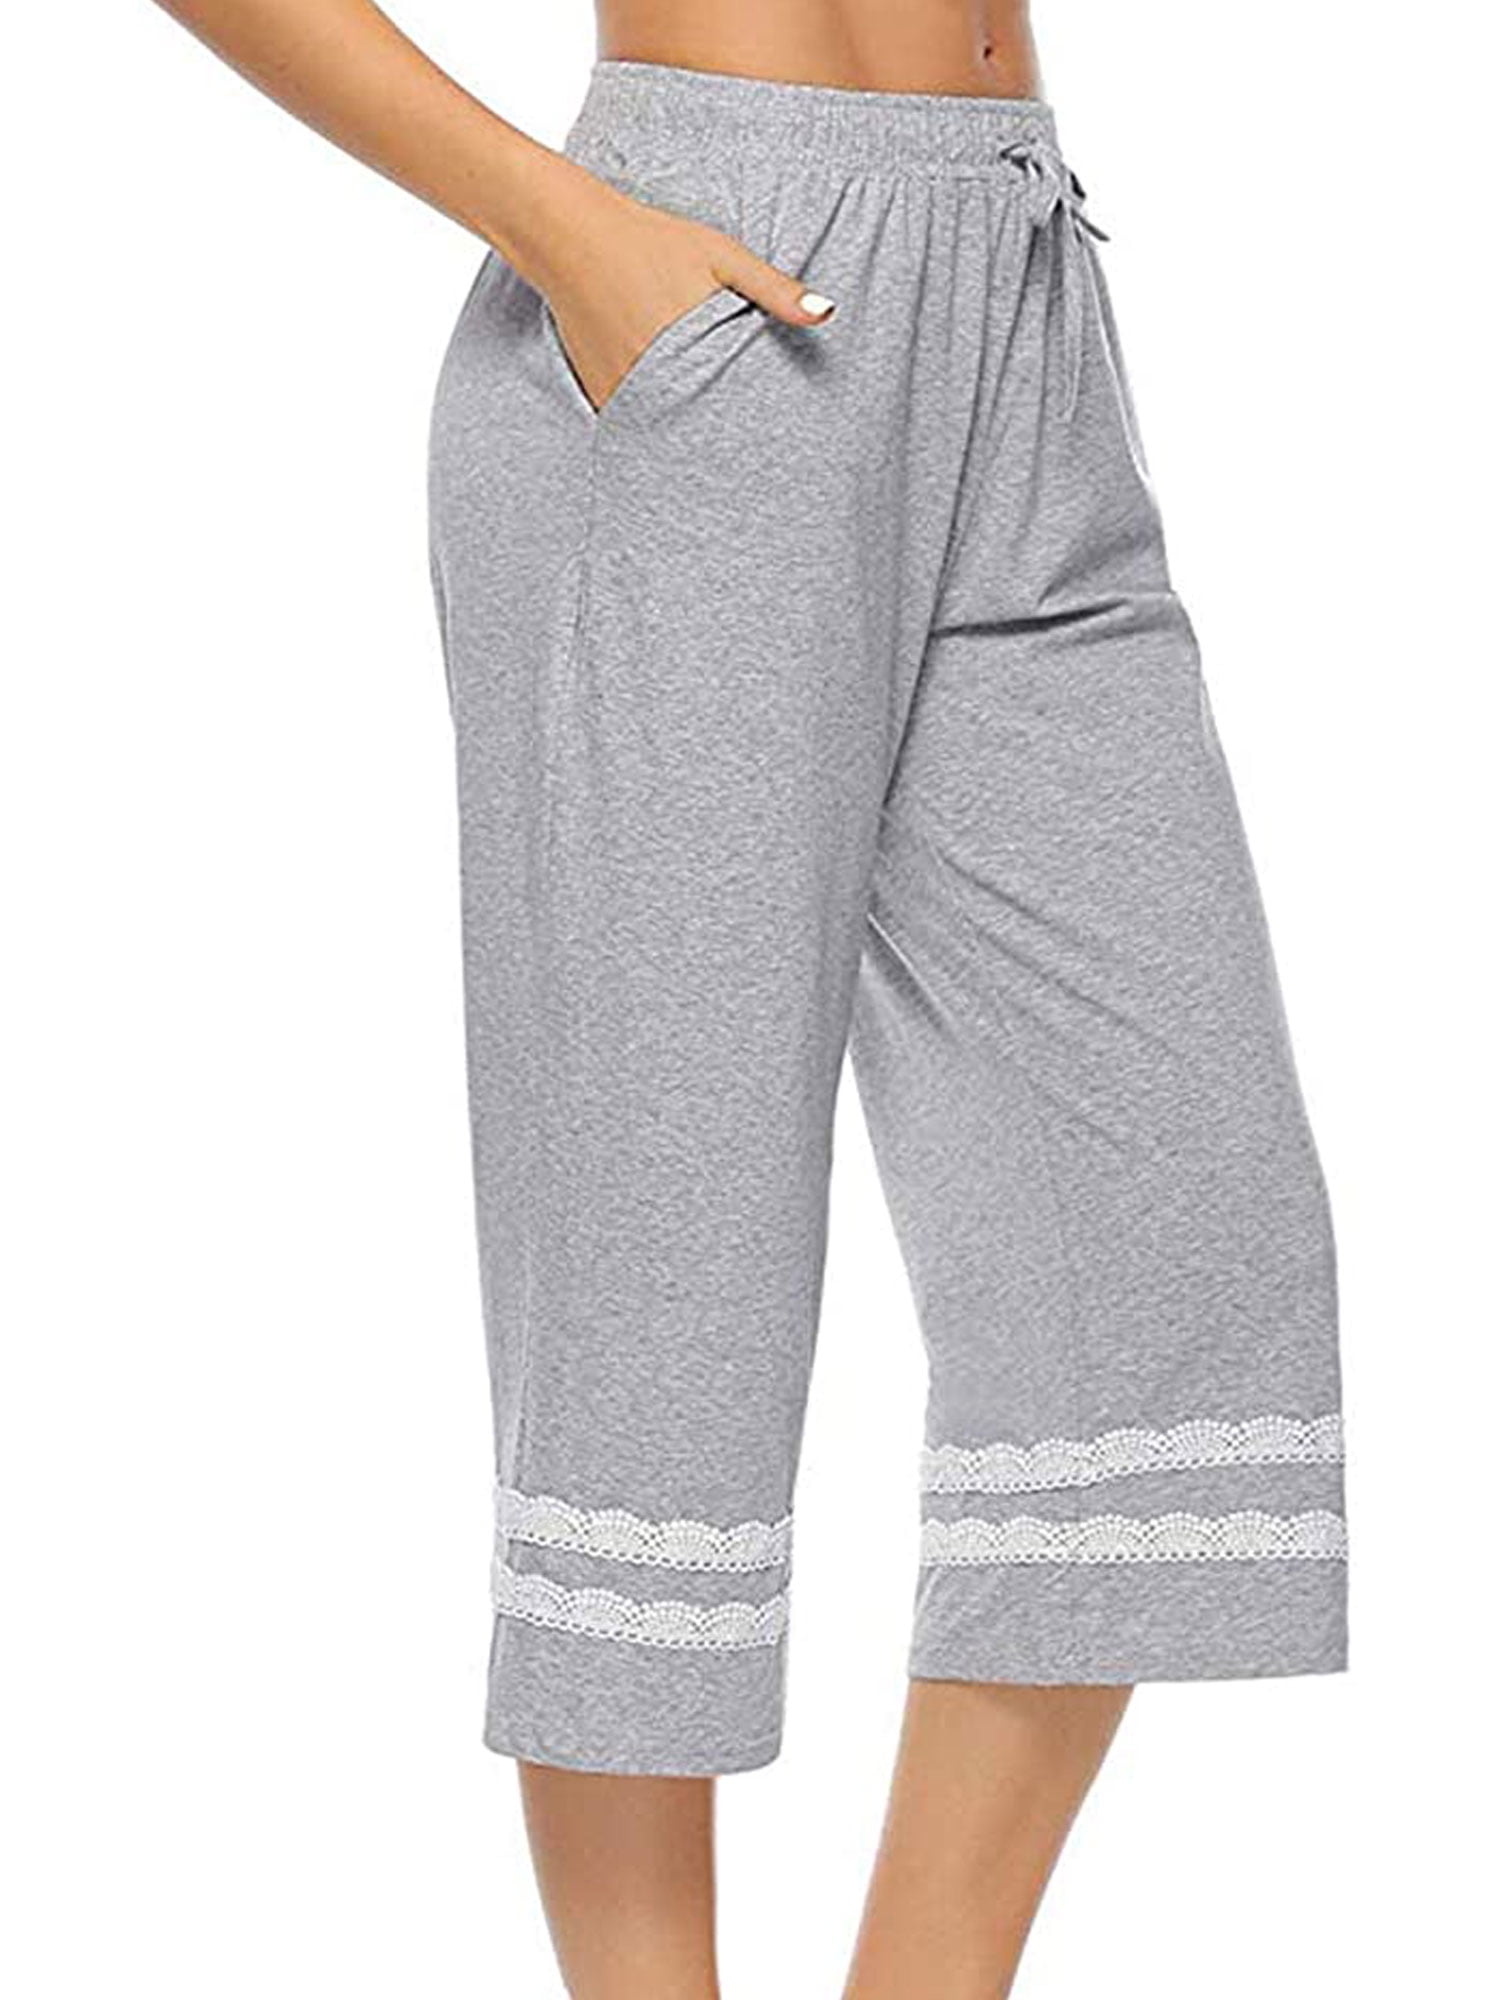 Emmababy Women’s Pajama Pants, Cropped Striped Loose High Waist ...